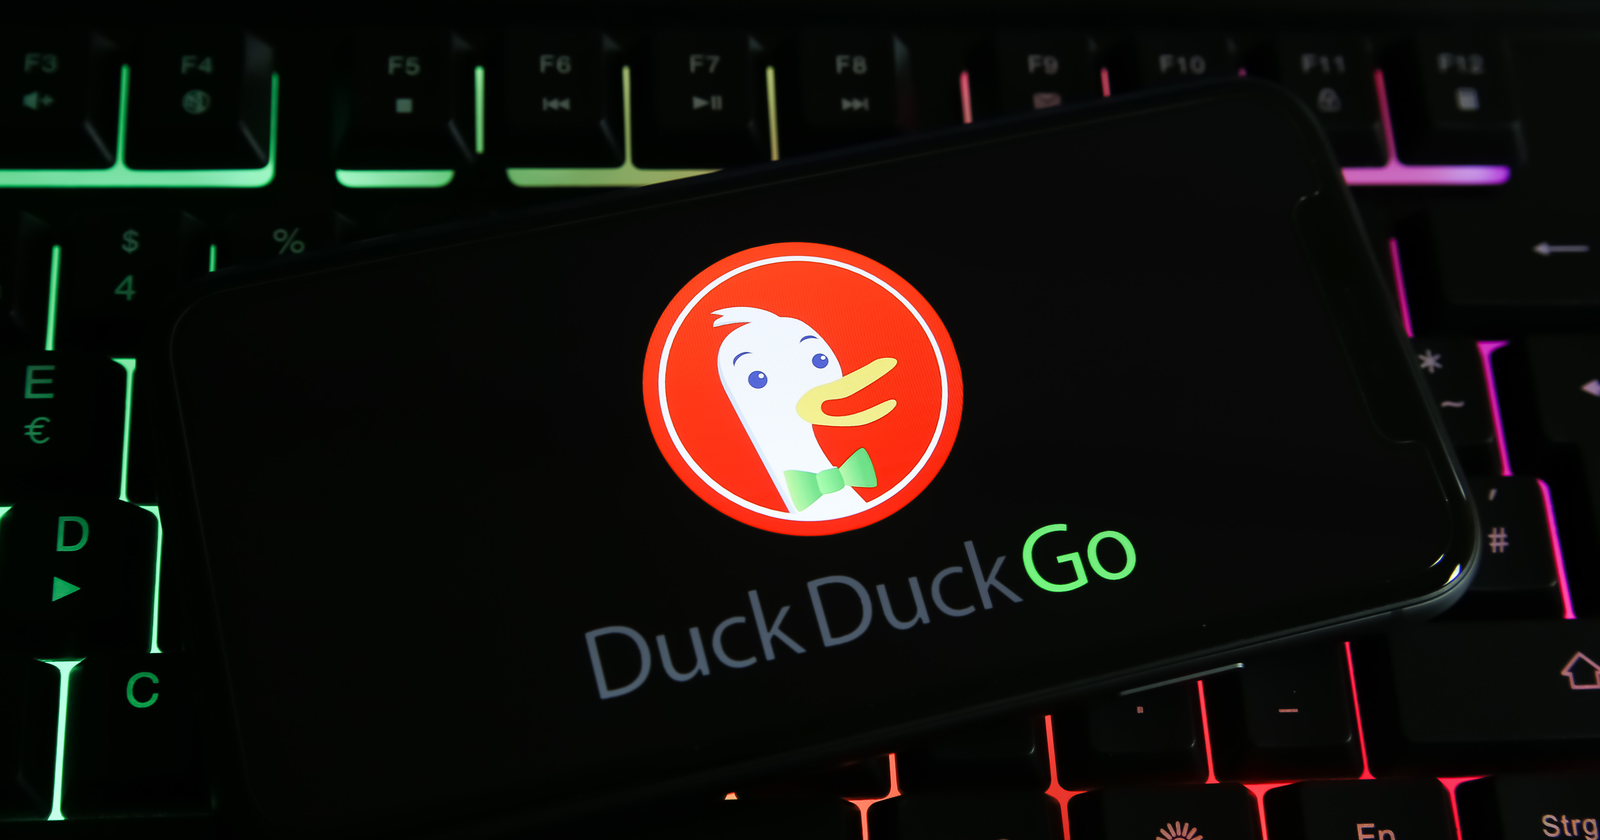 DuckDuckGo Reaches 100B Searches, However Progress Is Slowing Down